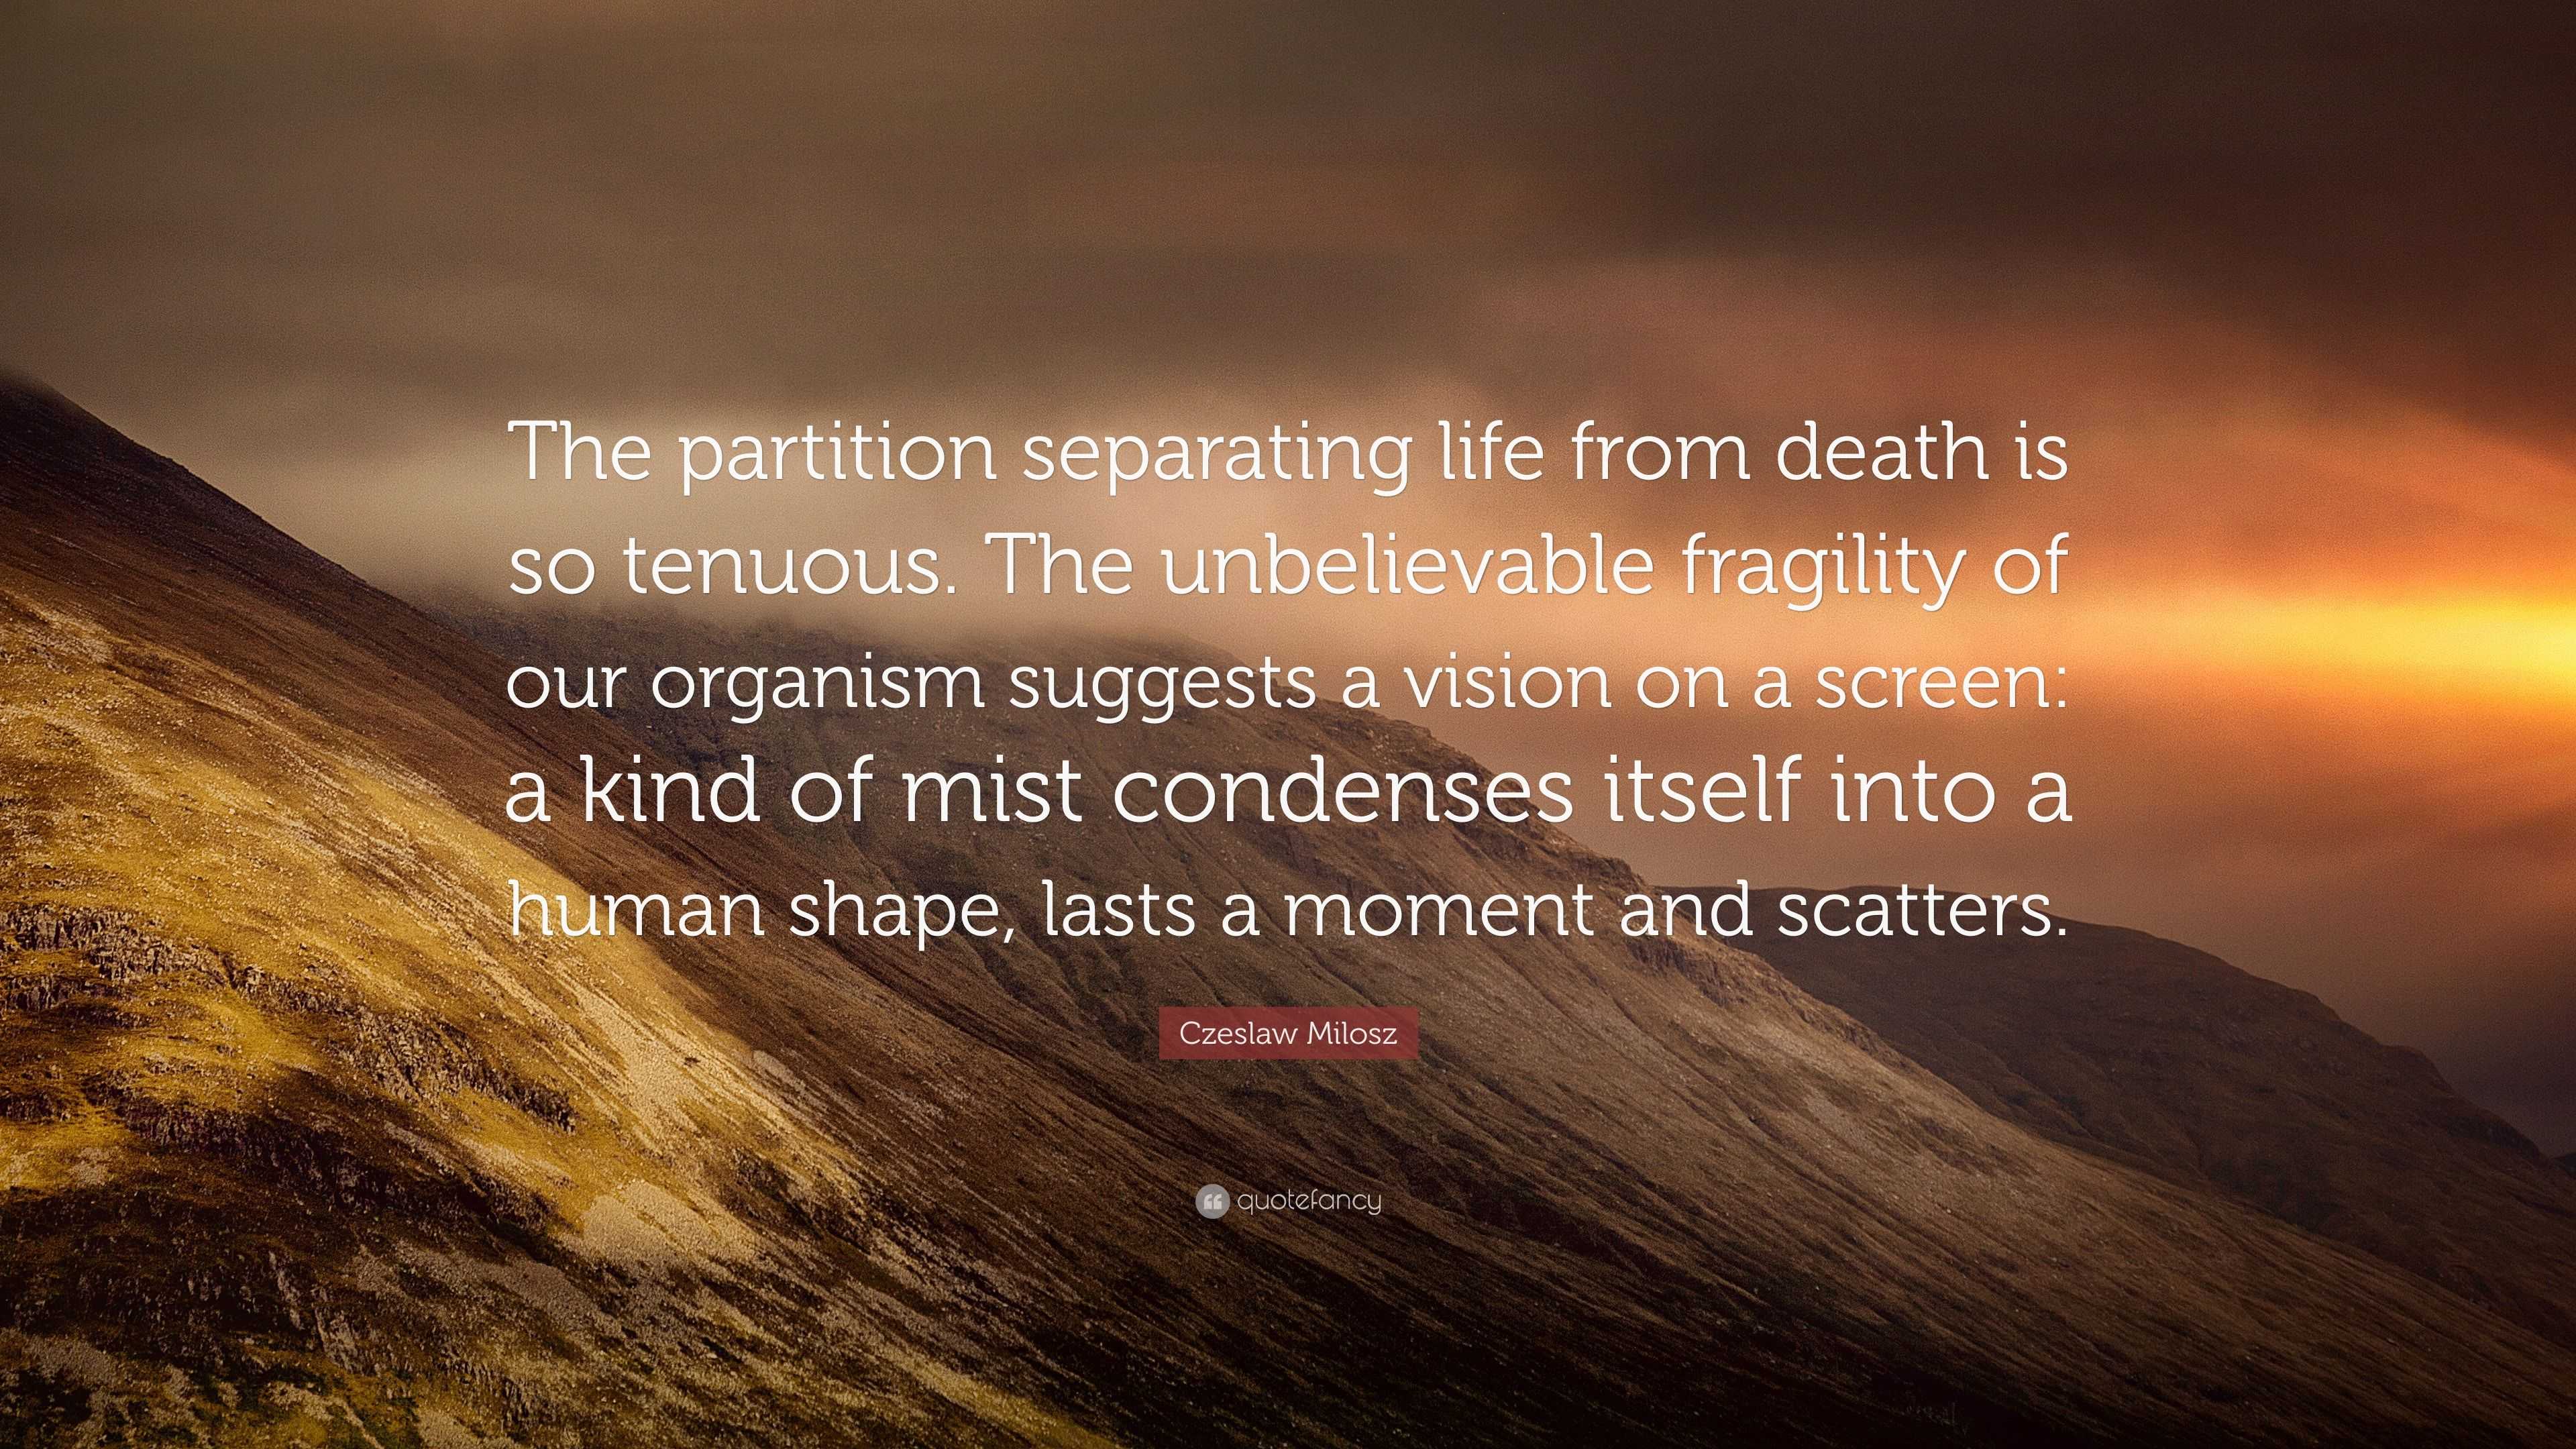 Czeslaw Milosz Quote: “The partition separating life from death is so ...